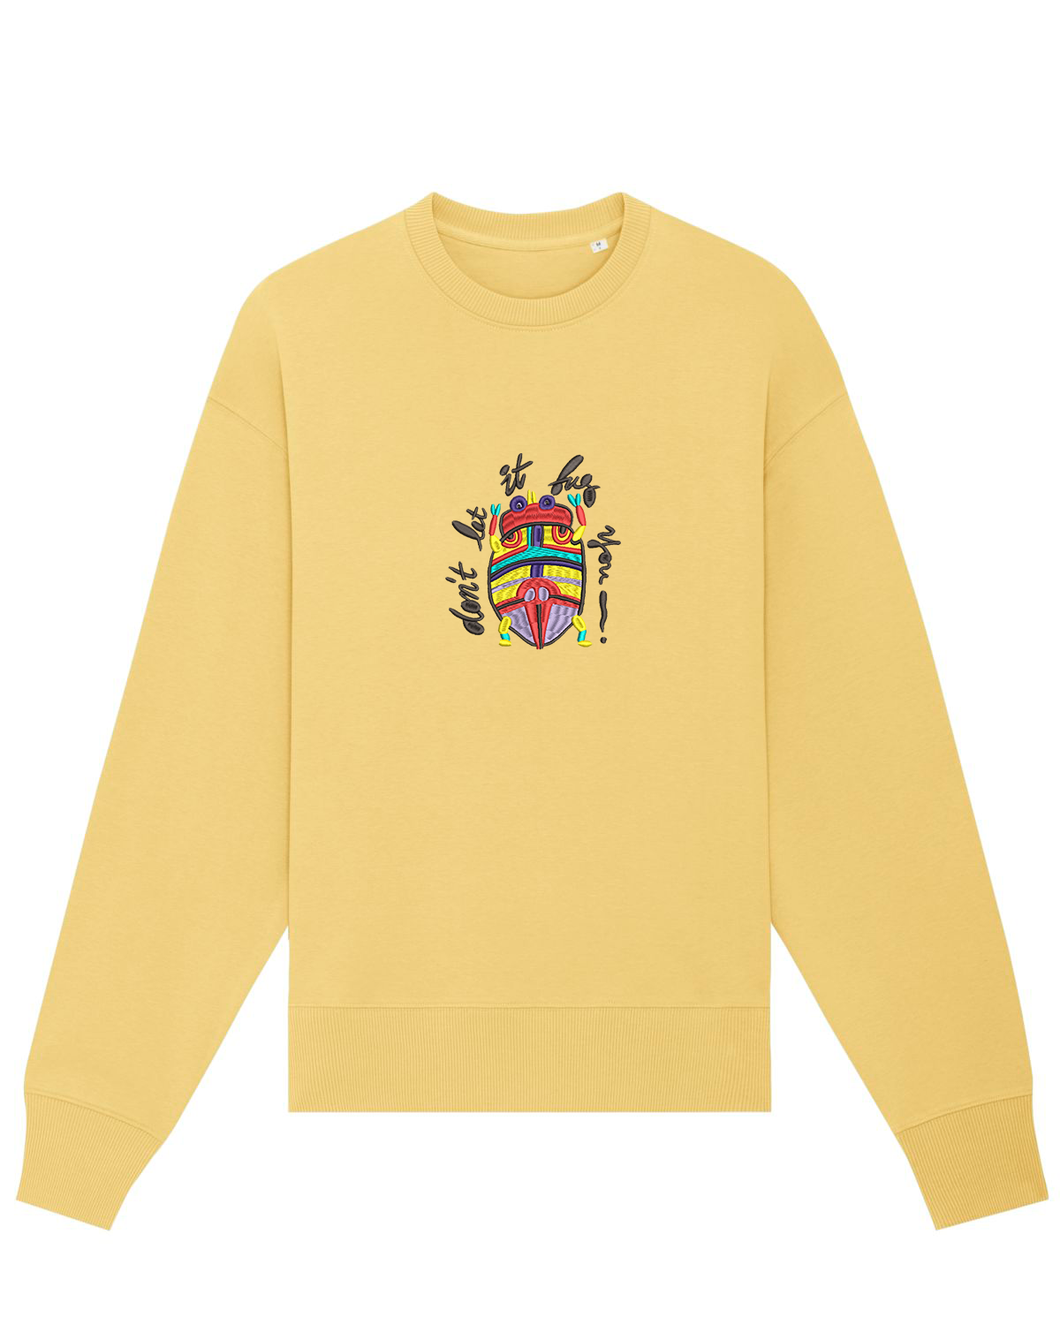 Don't let it bug you 🐞 - Embroidered UNISEX RELAXED CREW NECK SWEATSHIRT